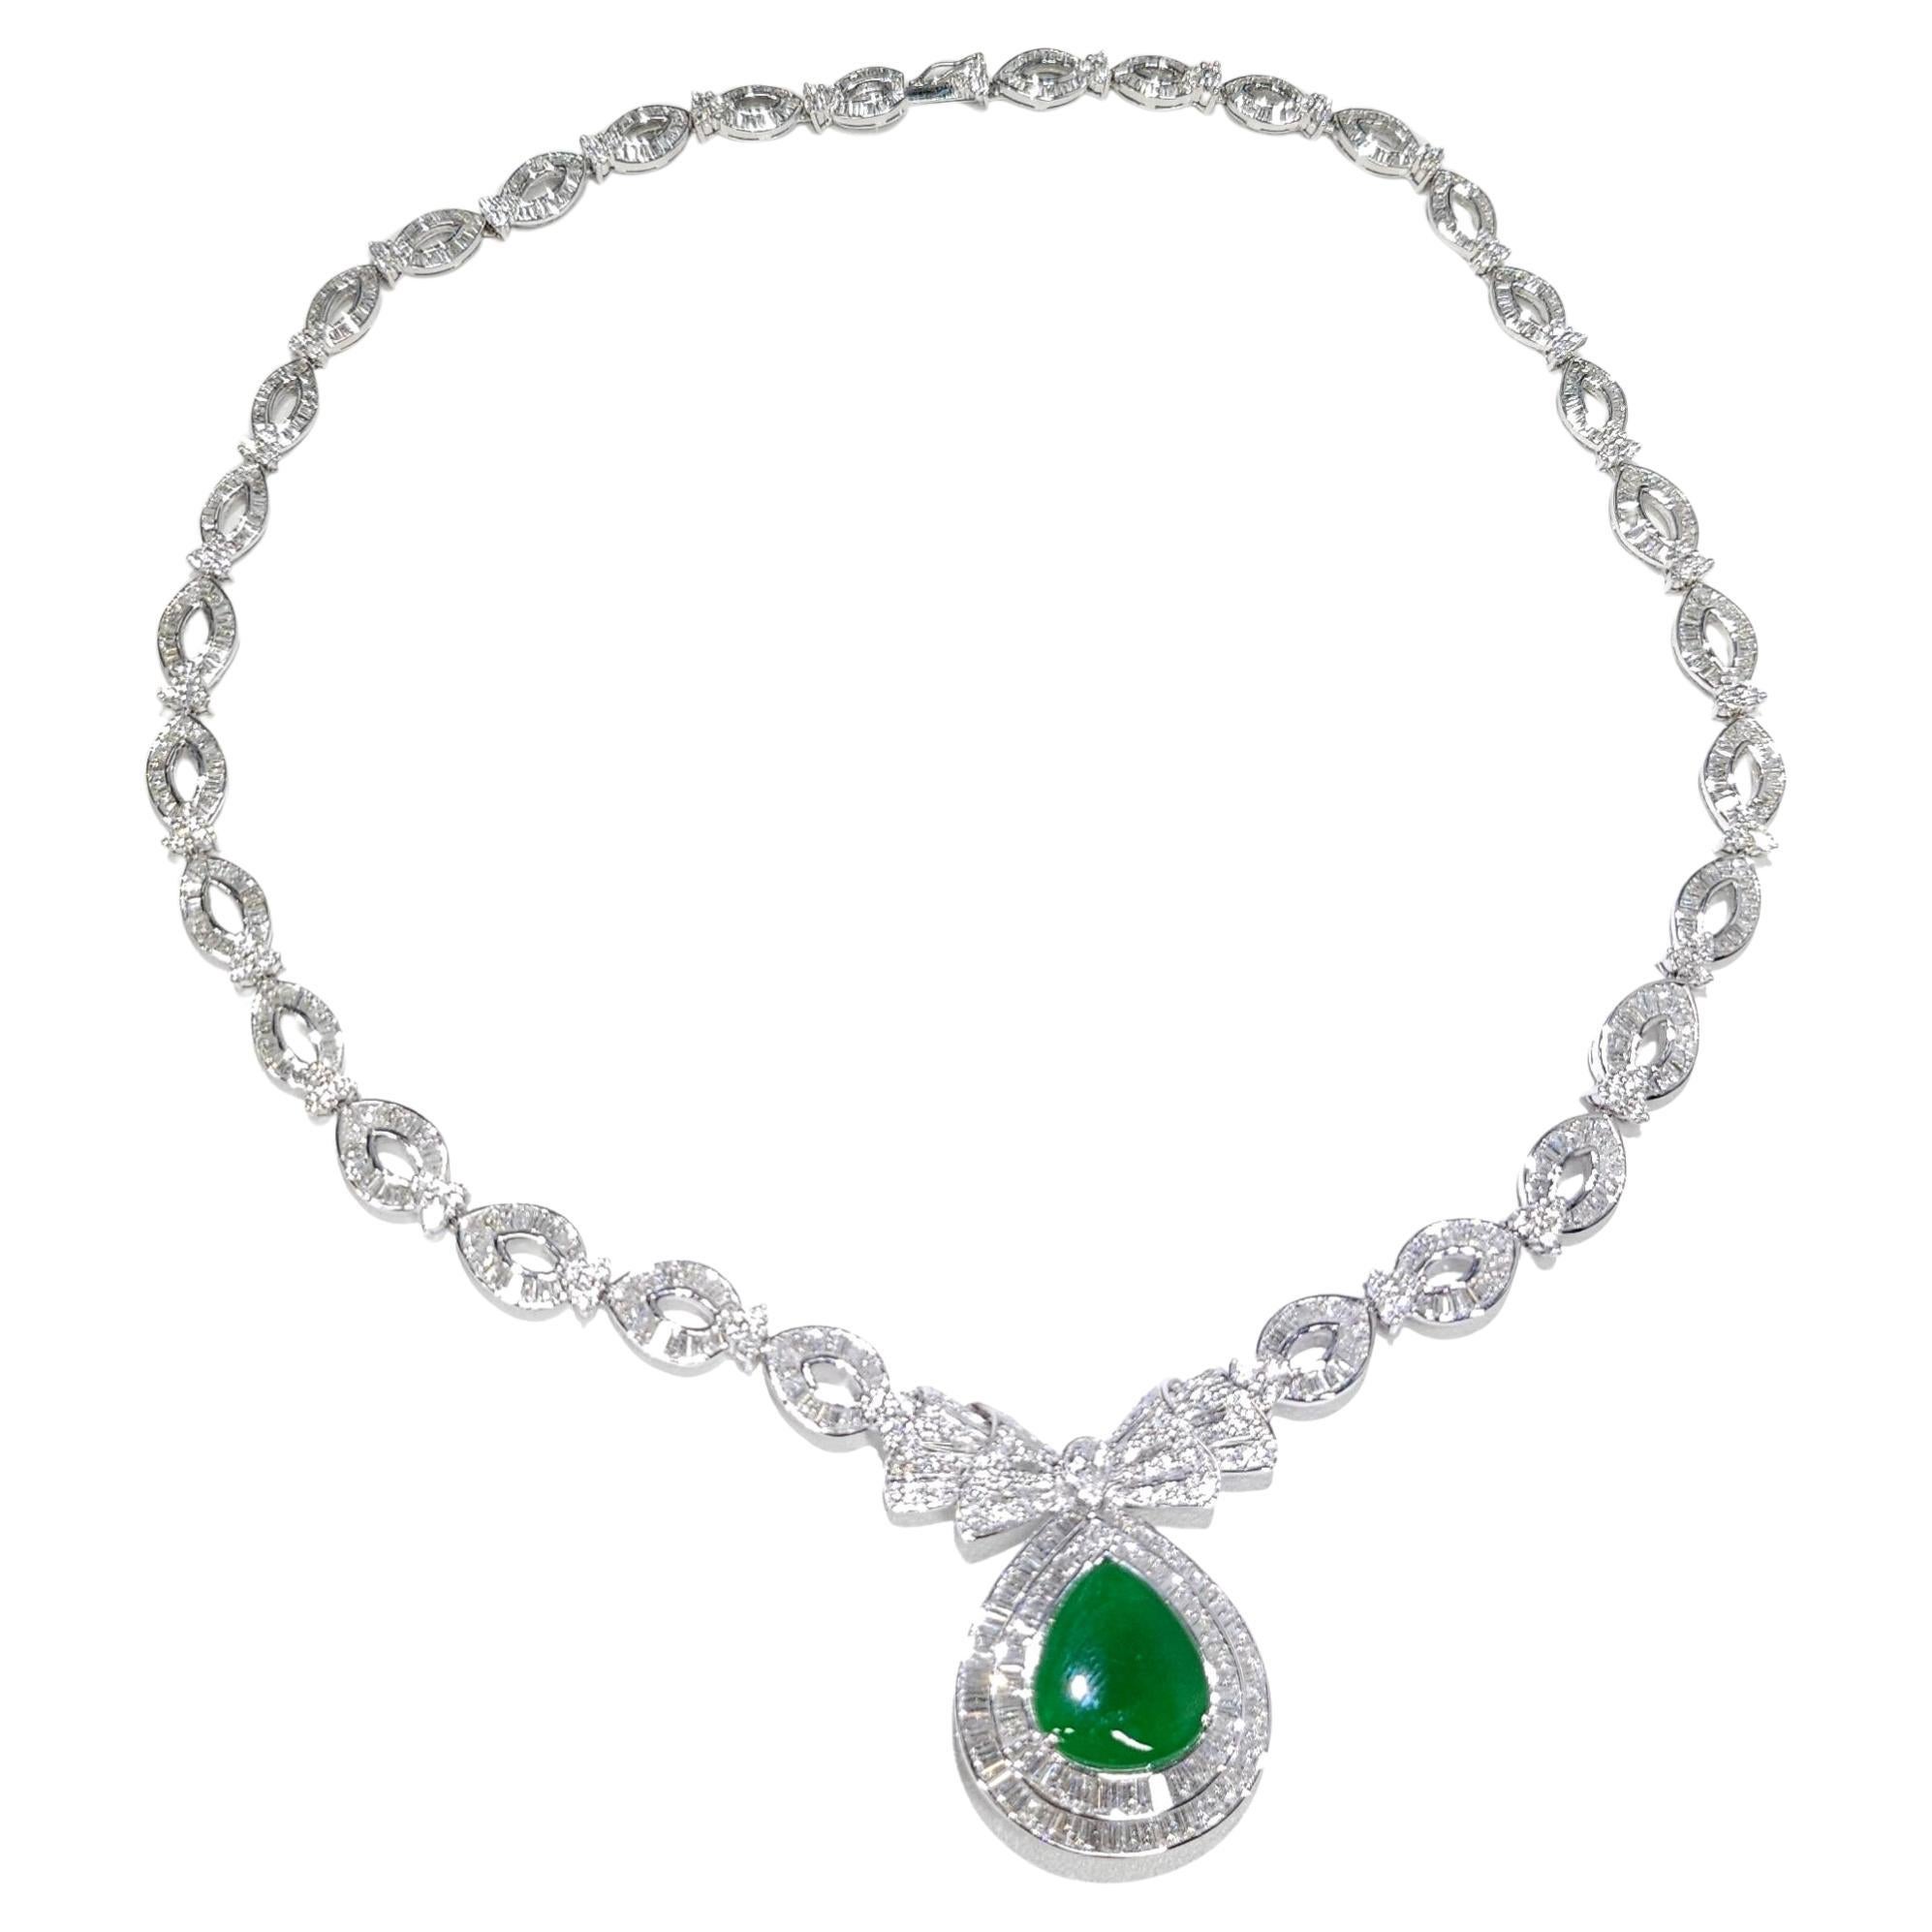 Certified Untreated Jadite Jade and 18Ct Diamond Necklace Brooch 18K White Gold For Sale